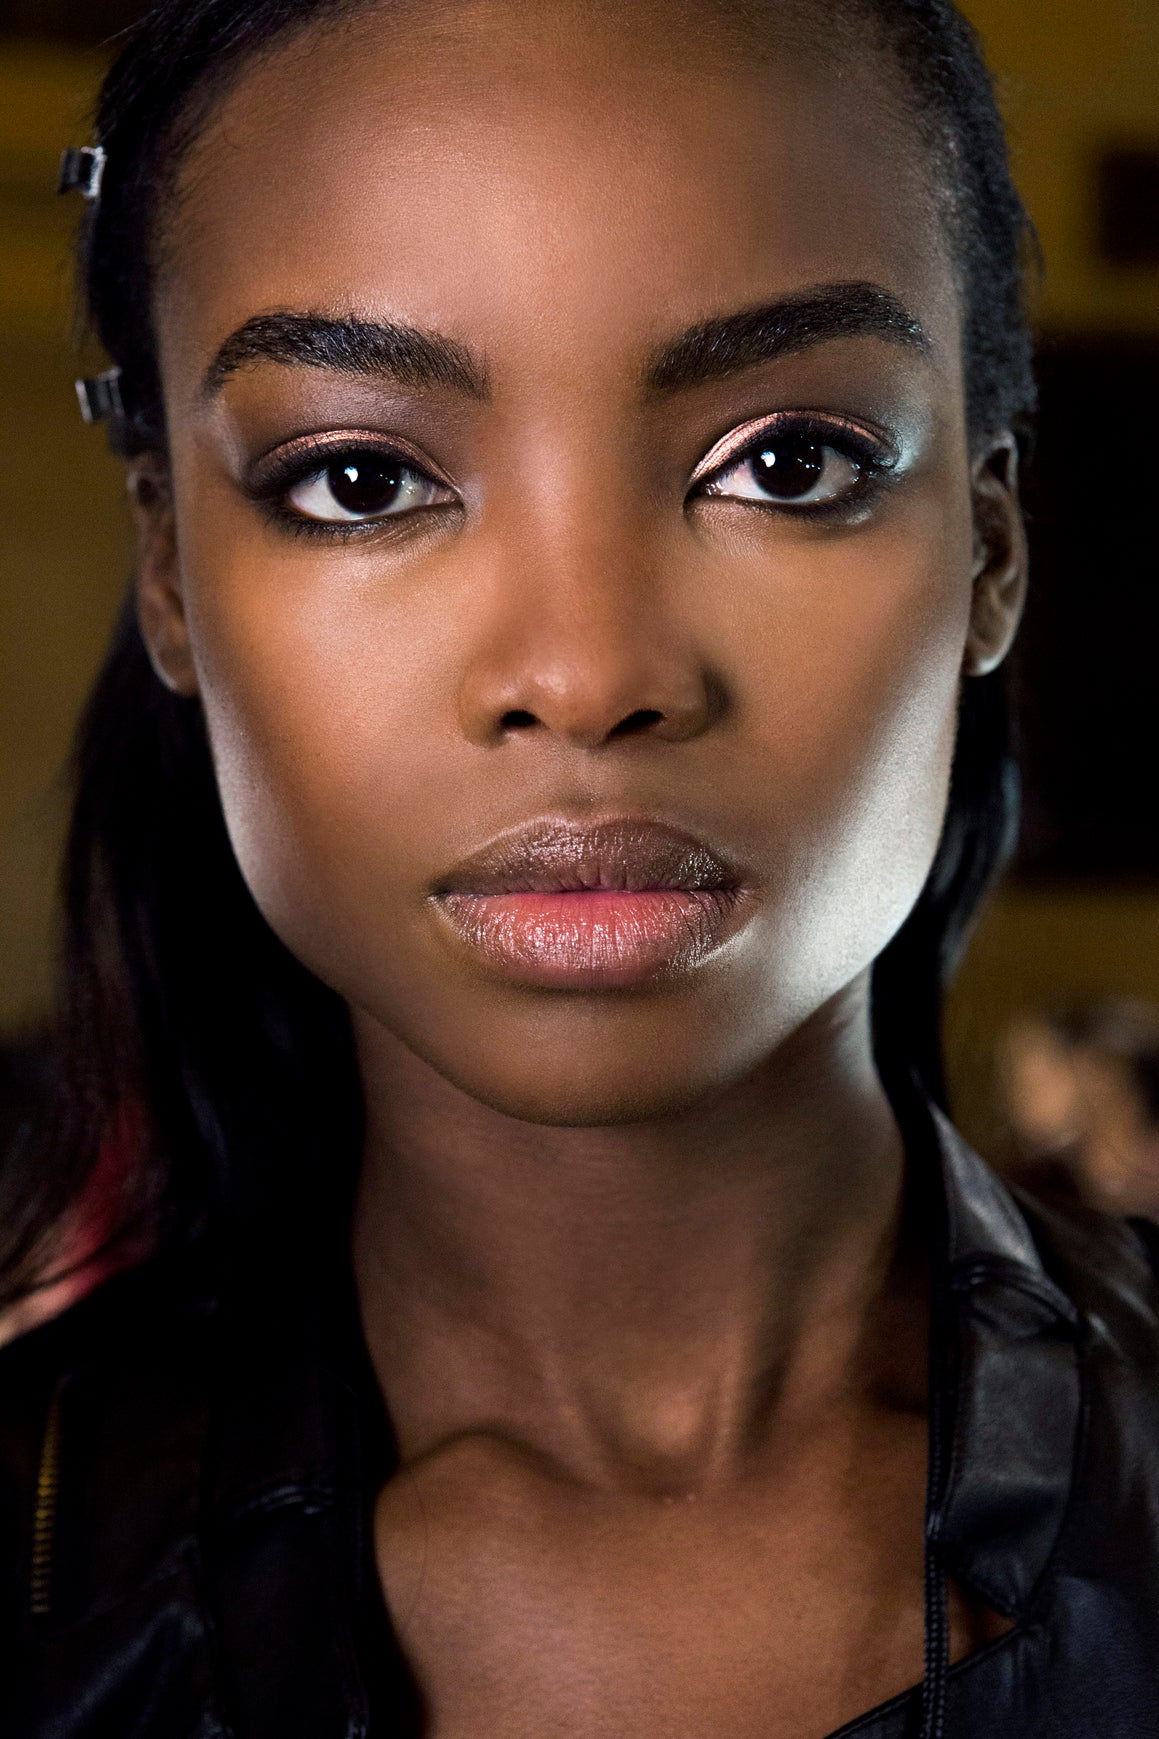 The Black Woman's Guide to Perfect Brows in 7 Steps
